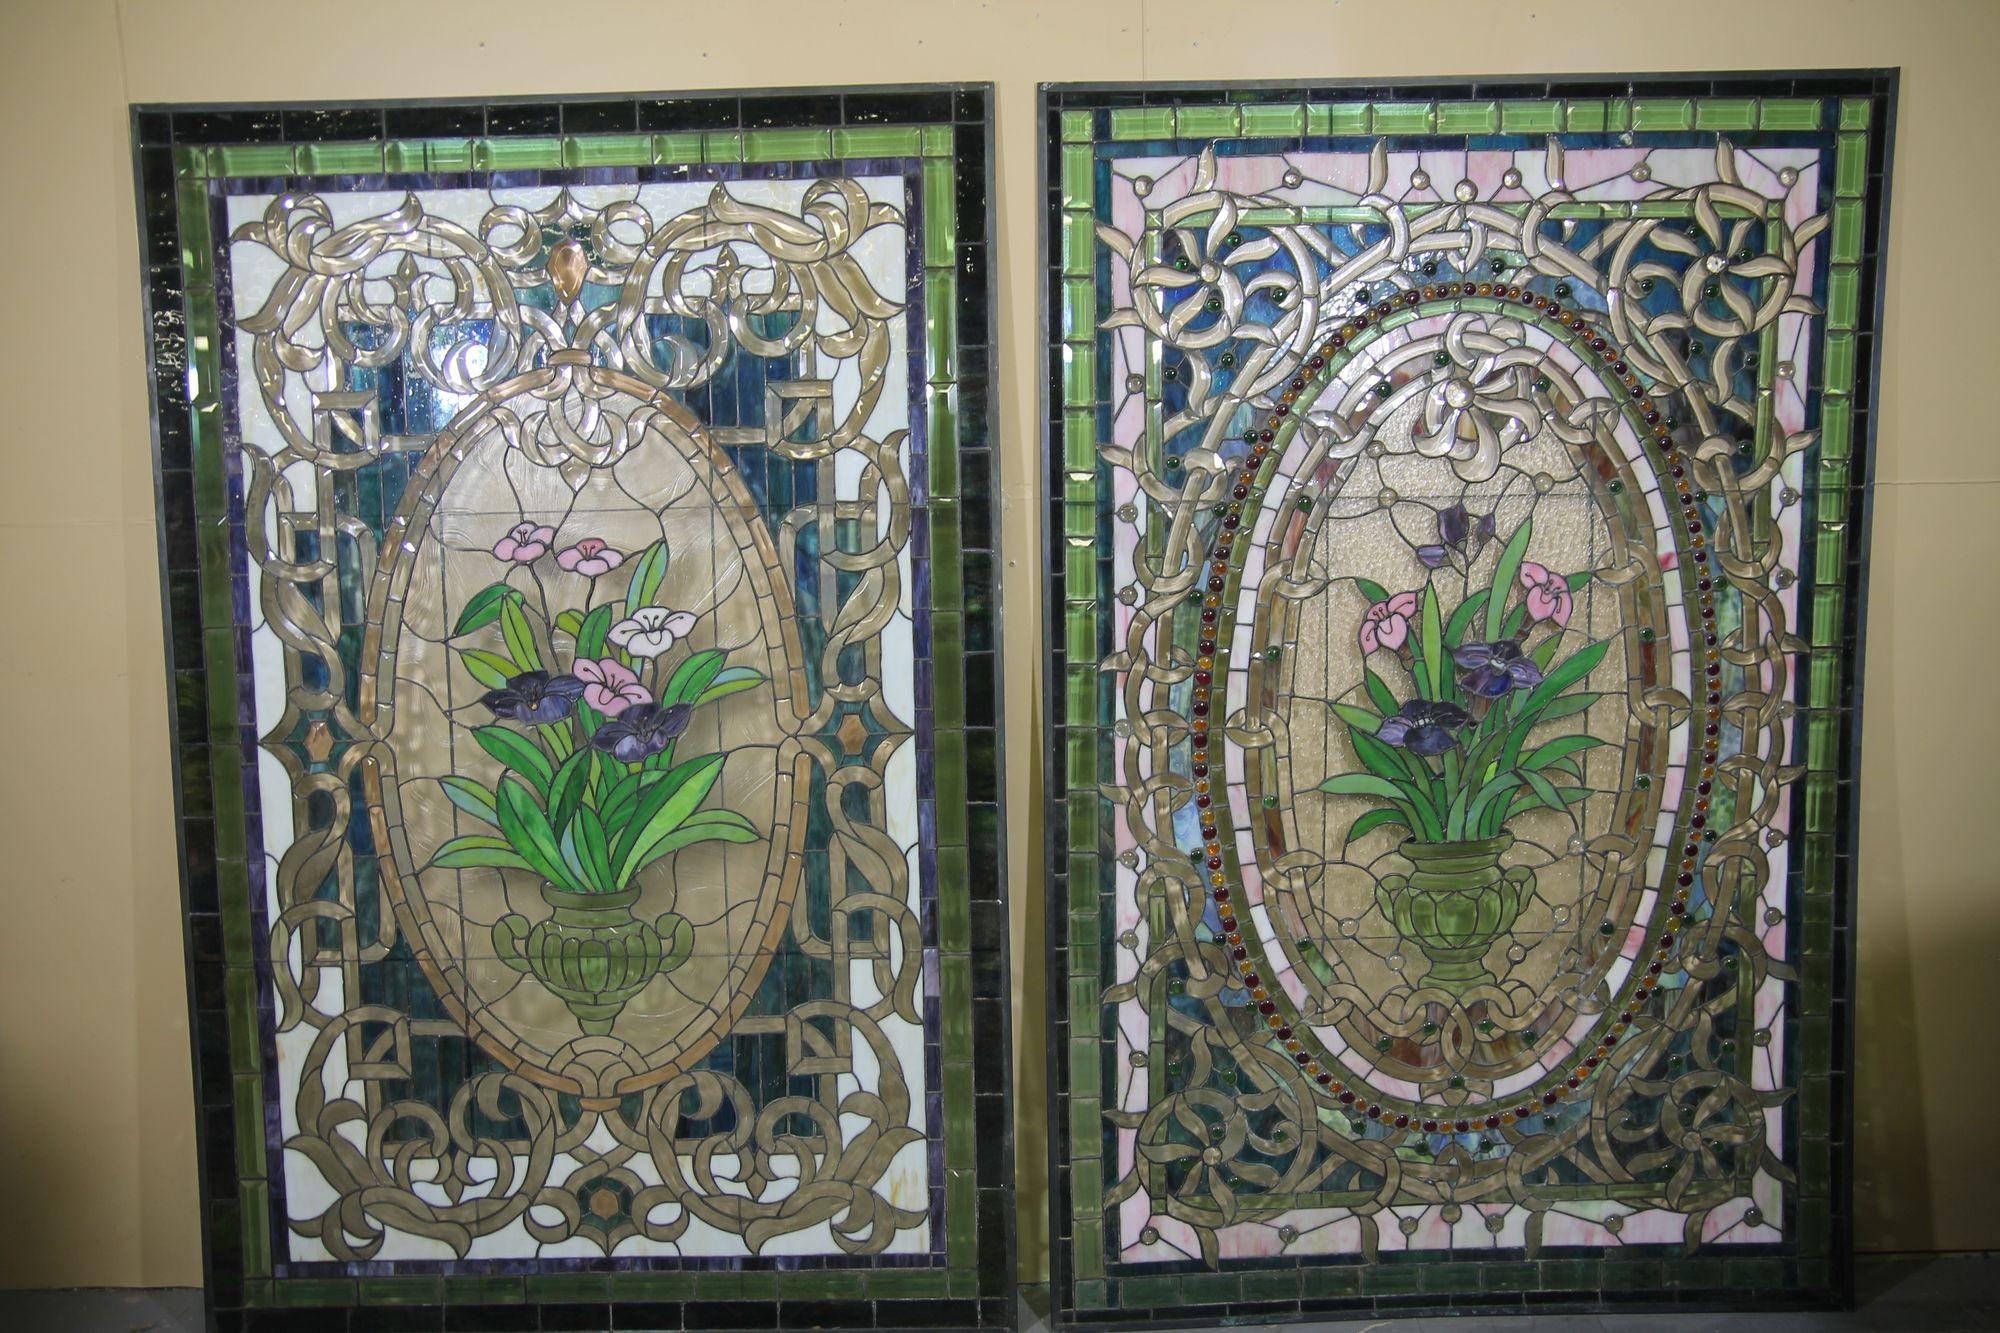 Pleased to offer these great stained glass panels by NJ artist Doug Hartman. These wonderful panels were designed about 30 years ago but were never installed by the client. Dougs work is amazing and sadly Doug passed away in 2014.  These oversized